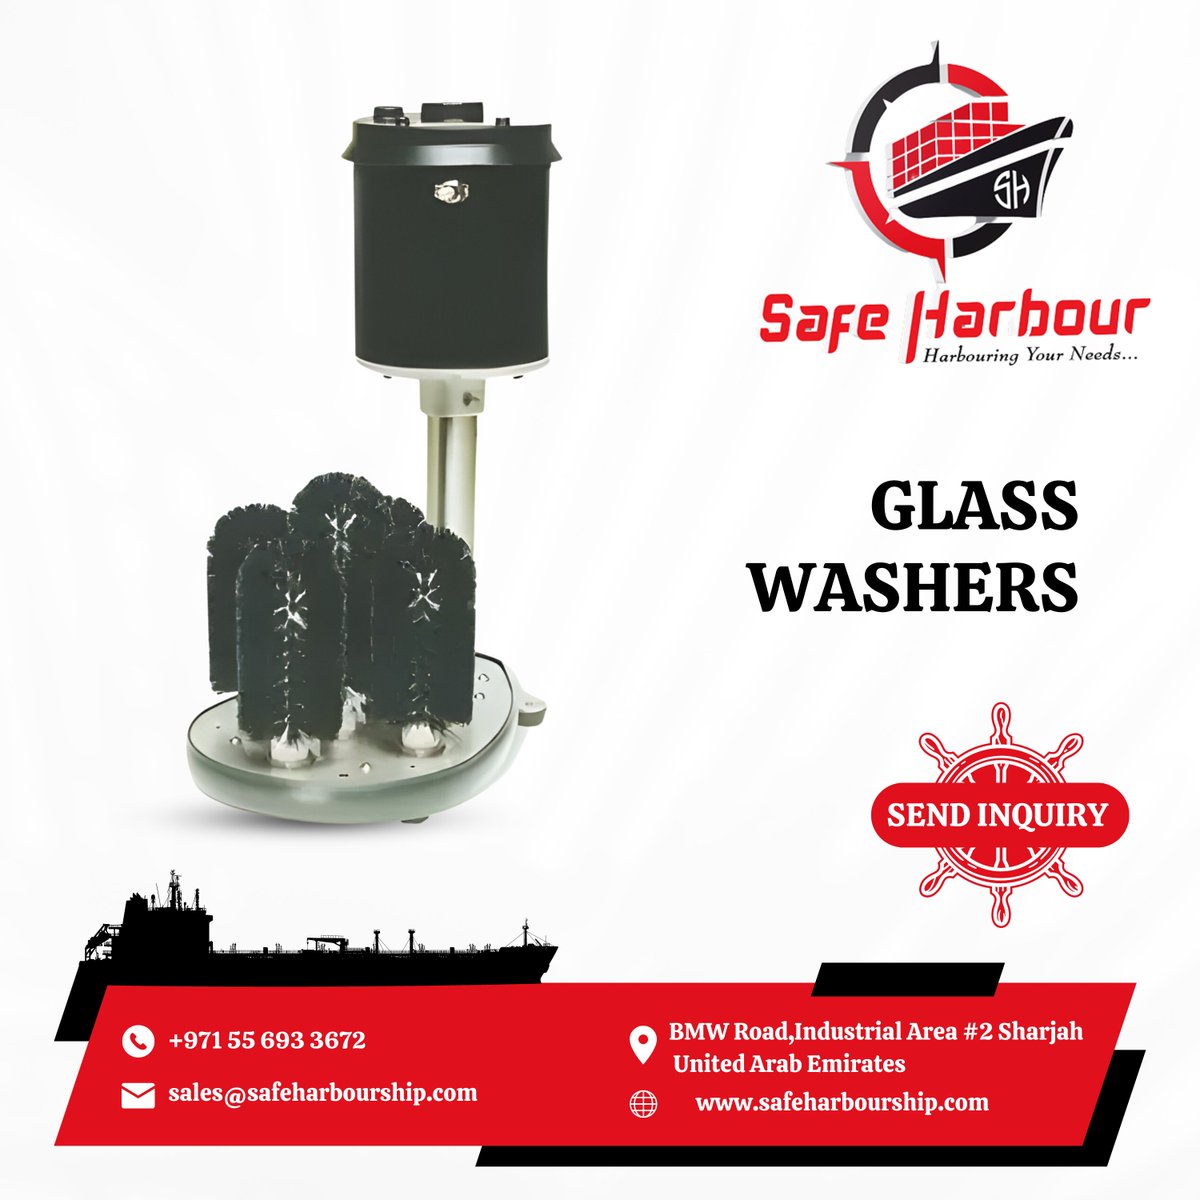 Experience spotless glassware every time with Safe Harbour's glass washer. Our marine-grade equipment ensures cleanliness and efficiency, setting new standards for hygiene.

Explore more at - safeharbourship.com
.
.
#washer #safeharbour #glasswasher #marineequipment